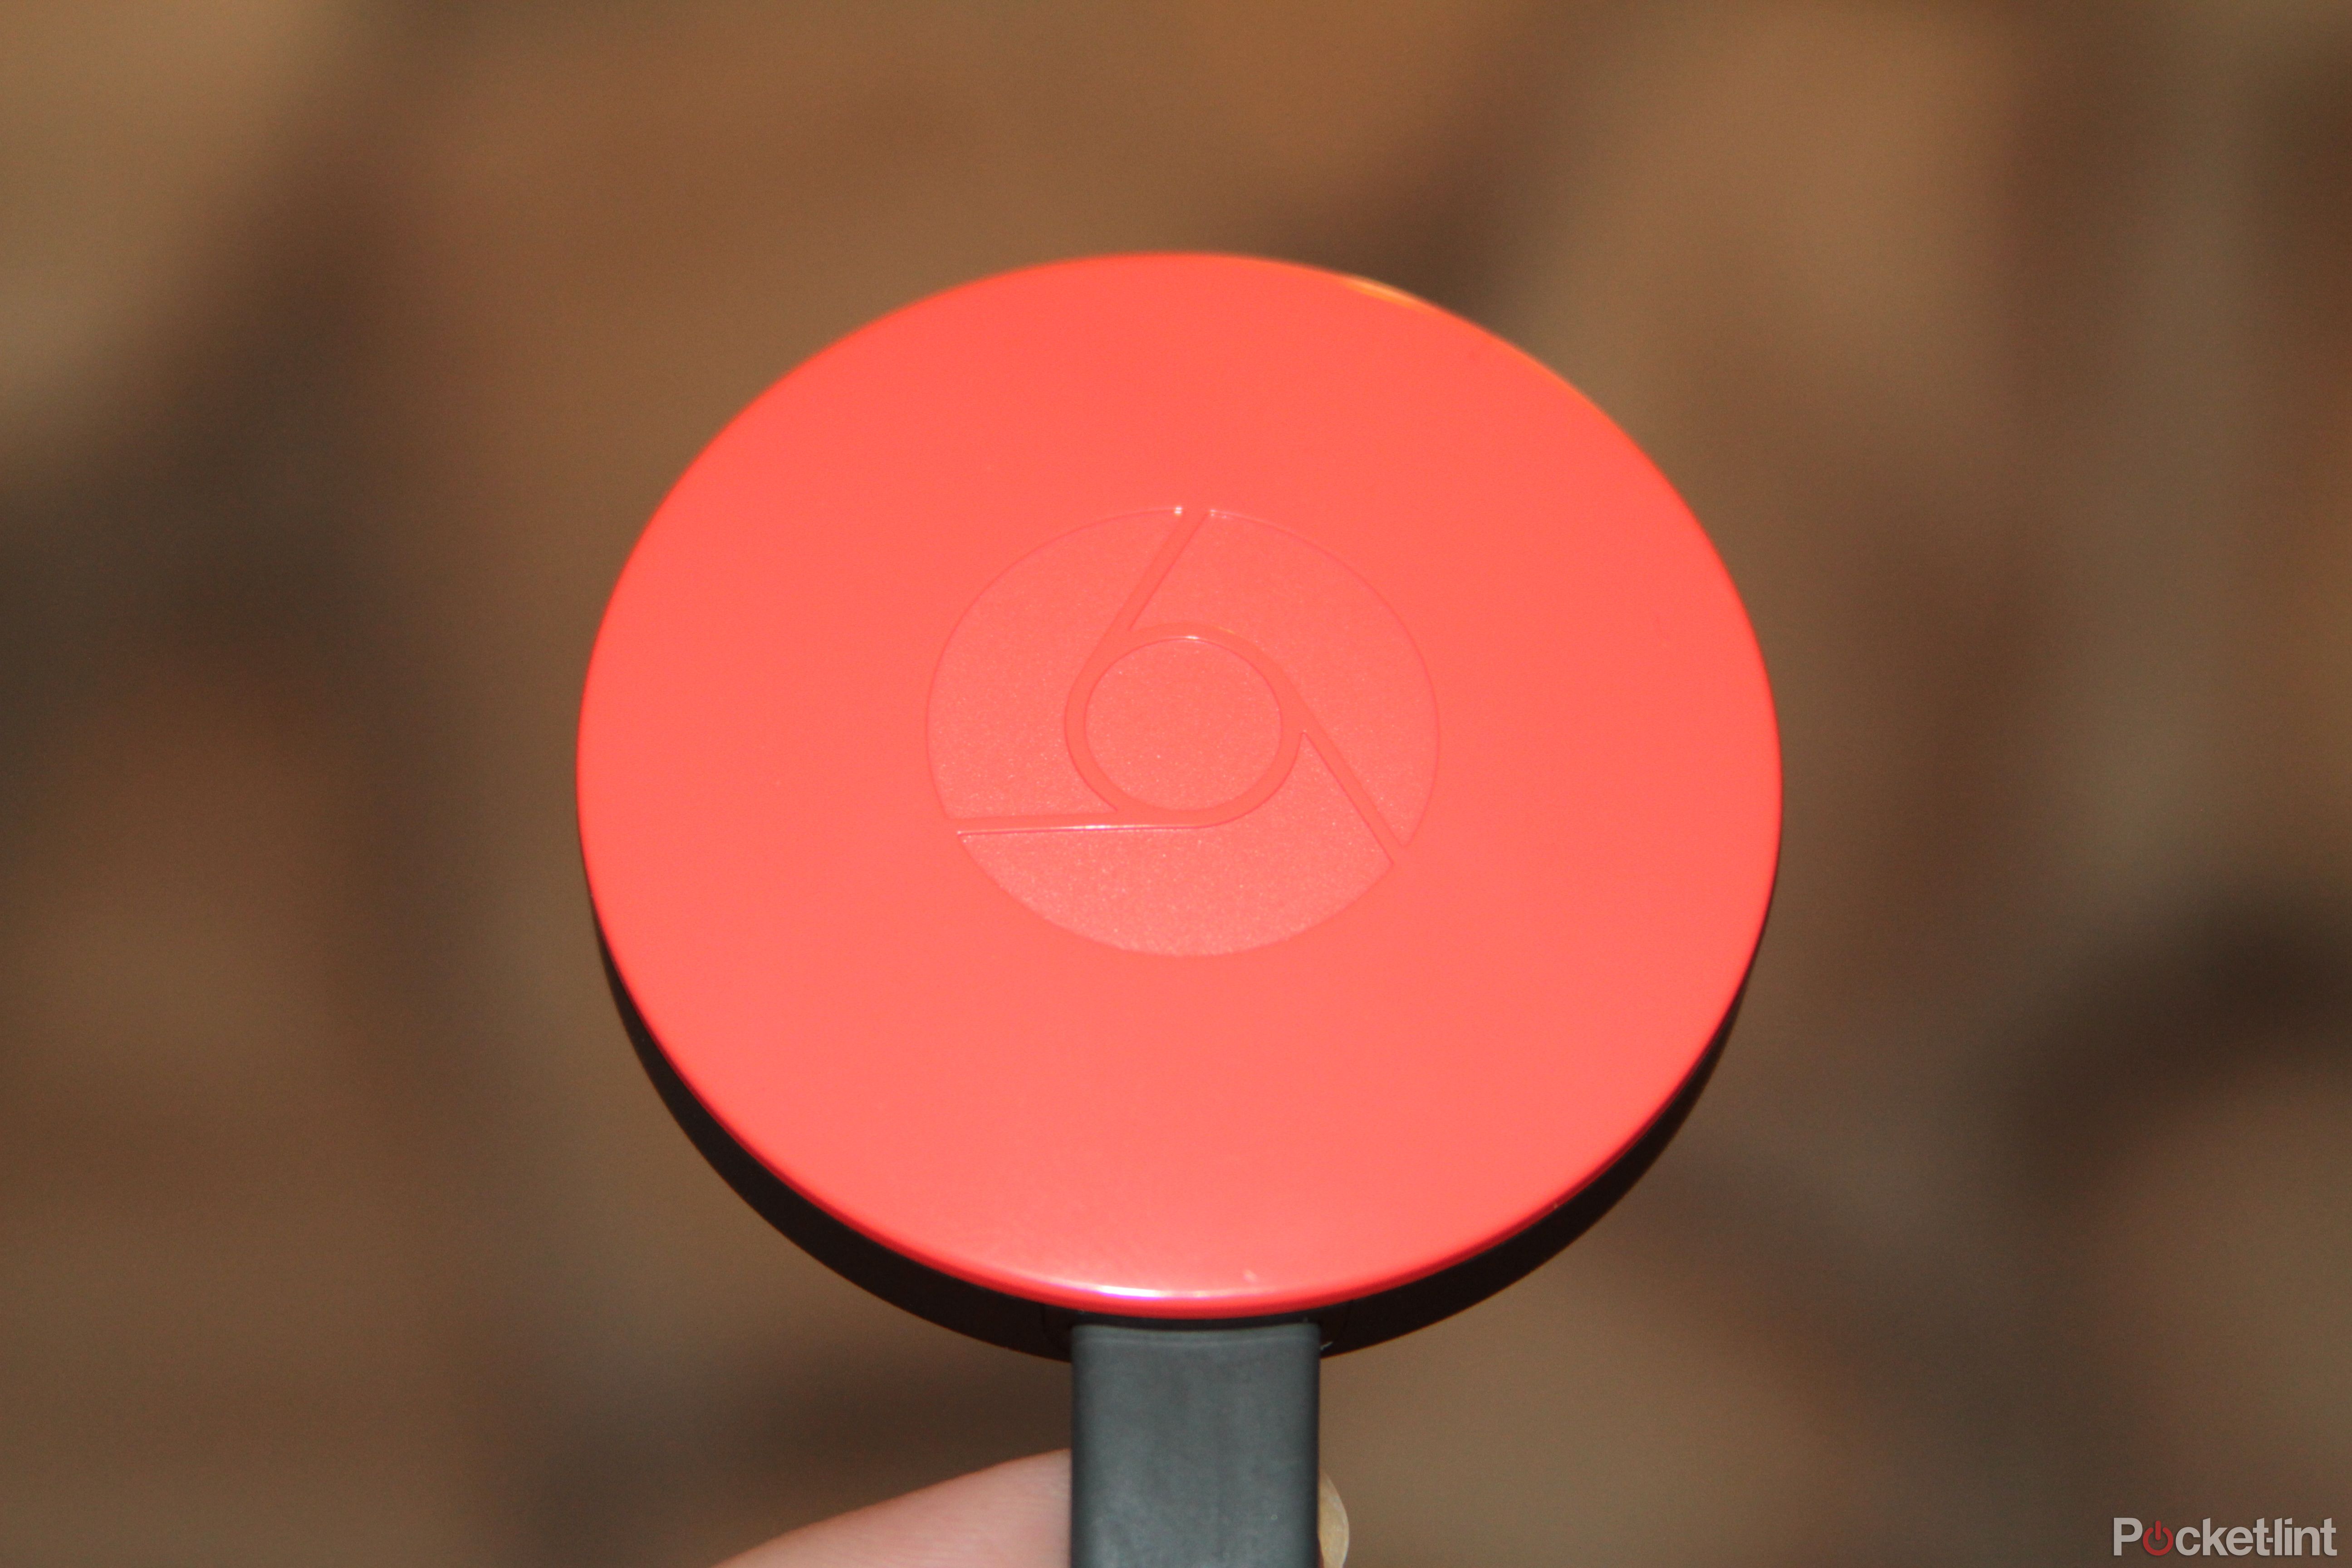 google is releasing chromecast updates early here’s how to get them image 1